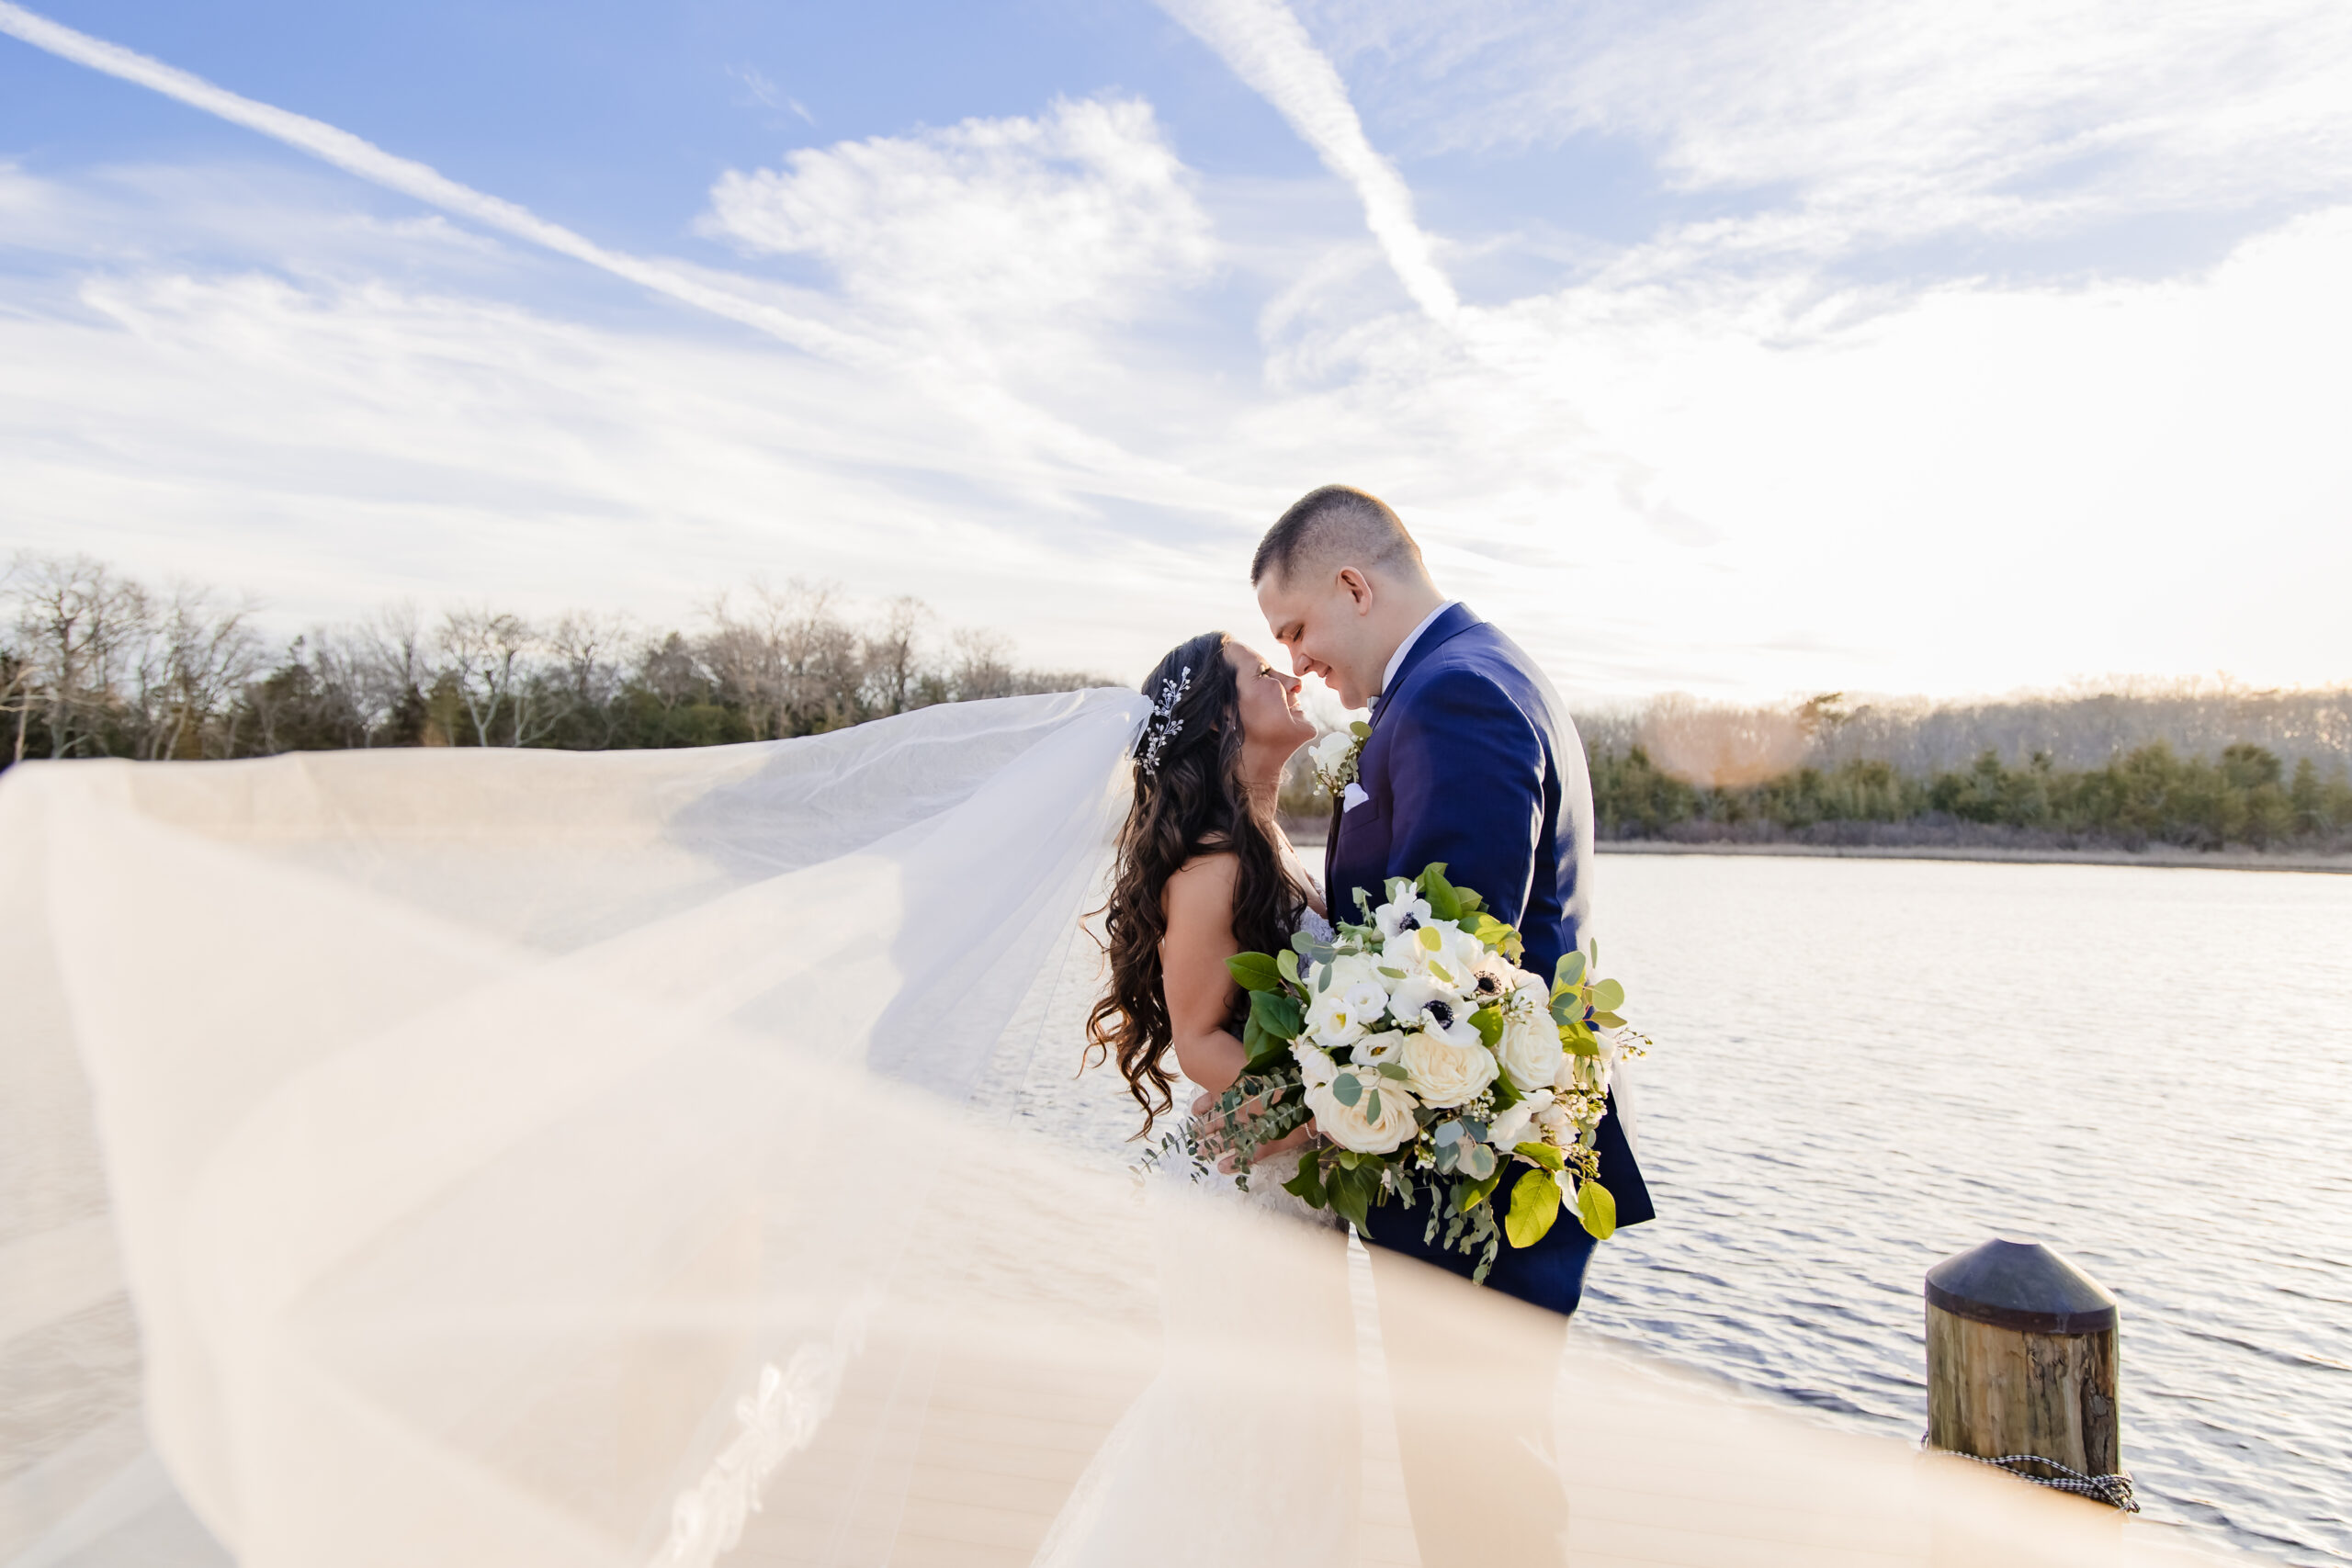 A romantic moment captured on the wedding day as the couple stands on the dock of The Mill at Lakeside Manor. The serene waters create a picturesque backdrop for this special occasion, captured by North Jersey wedding photographer Jarot Bocanegra